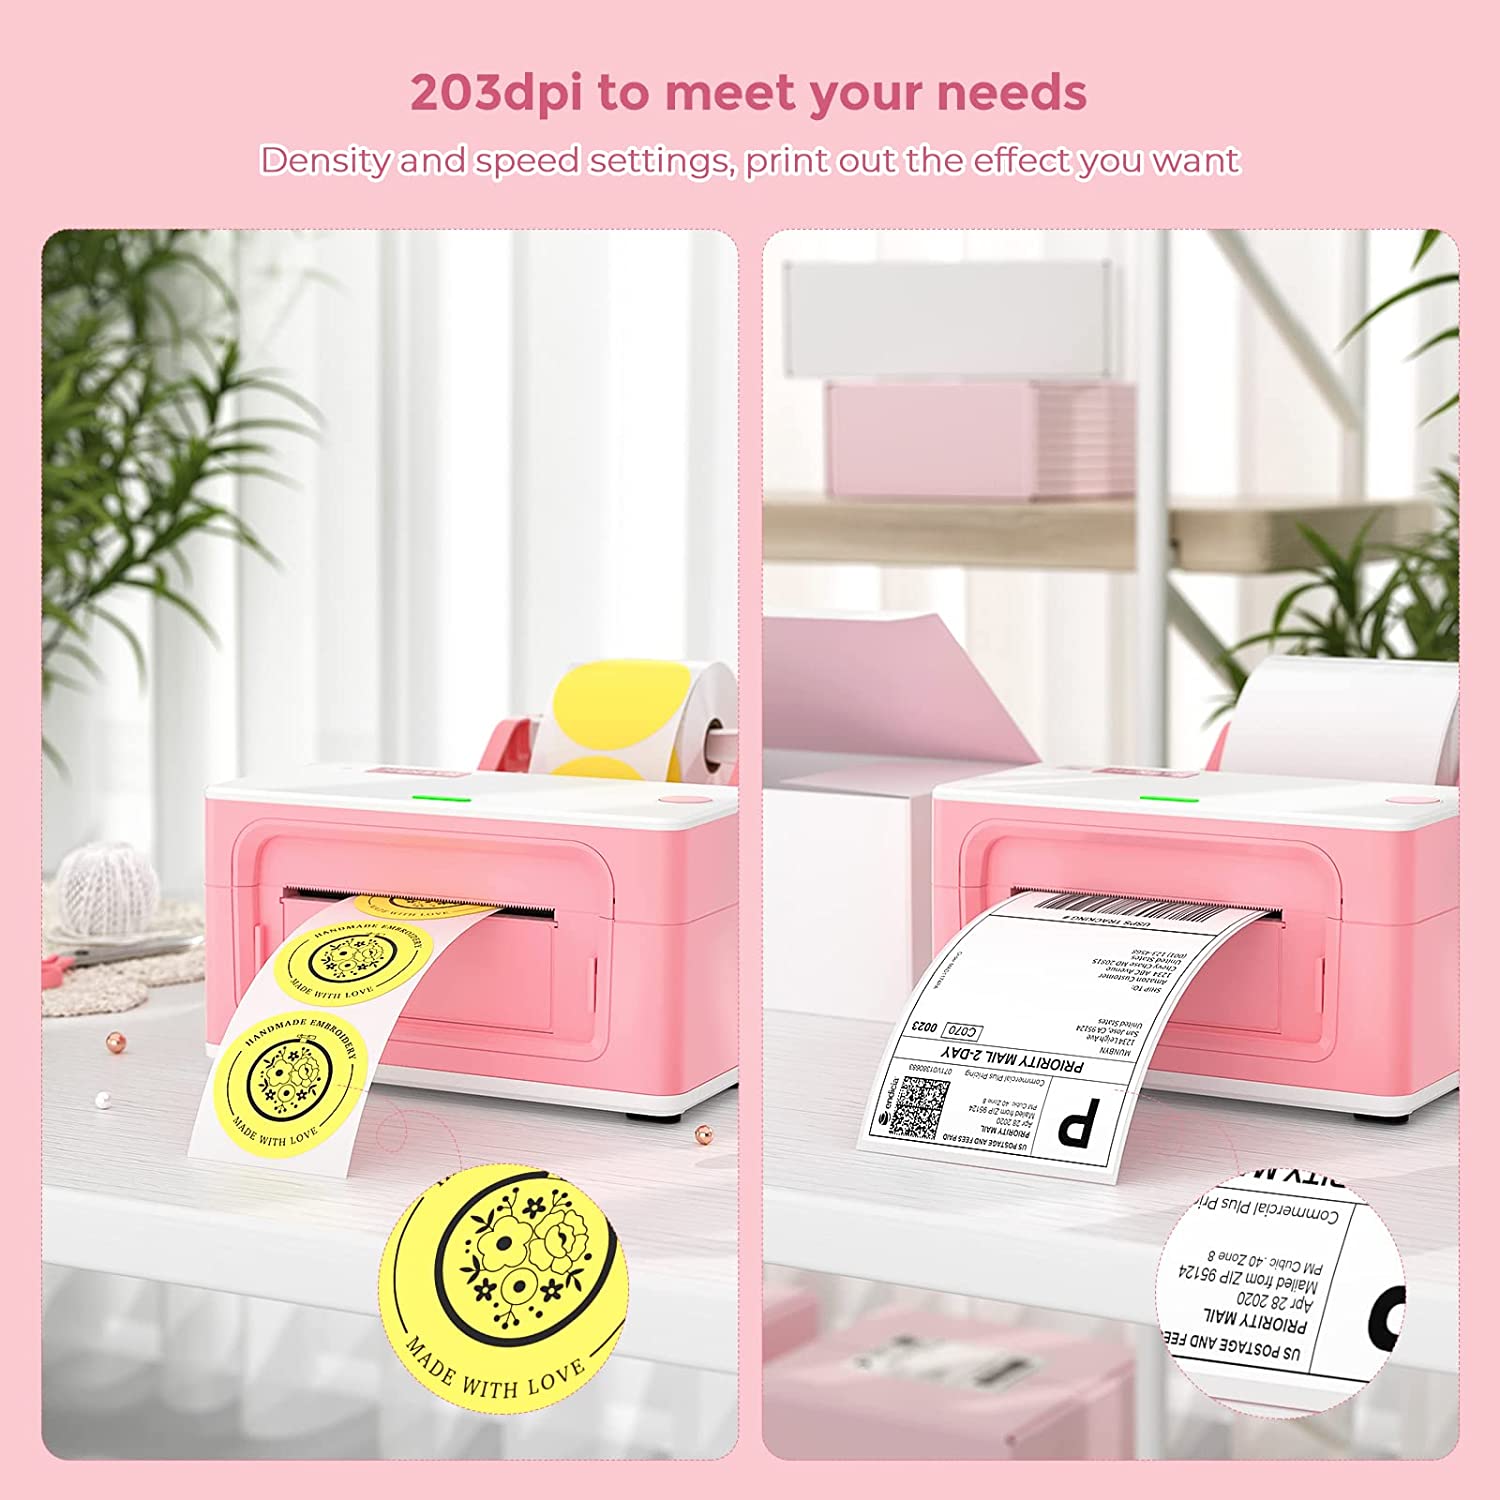 By adjusting the density and speed settings, you can print the results you want with a 203 DPI pink thermal labelprinter.